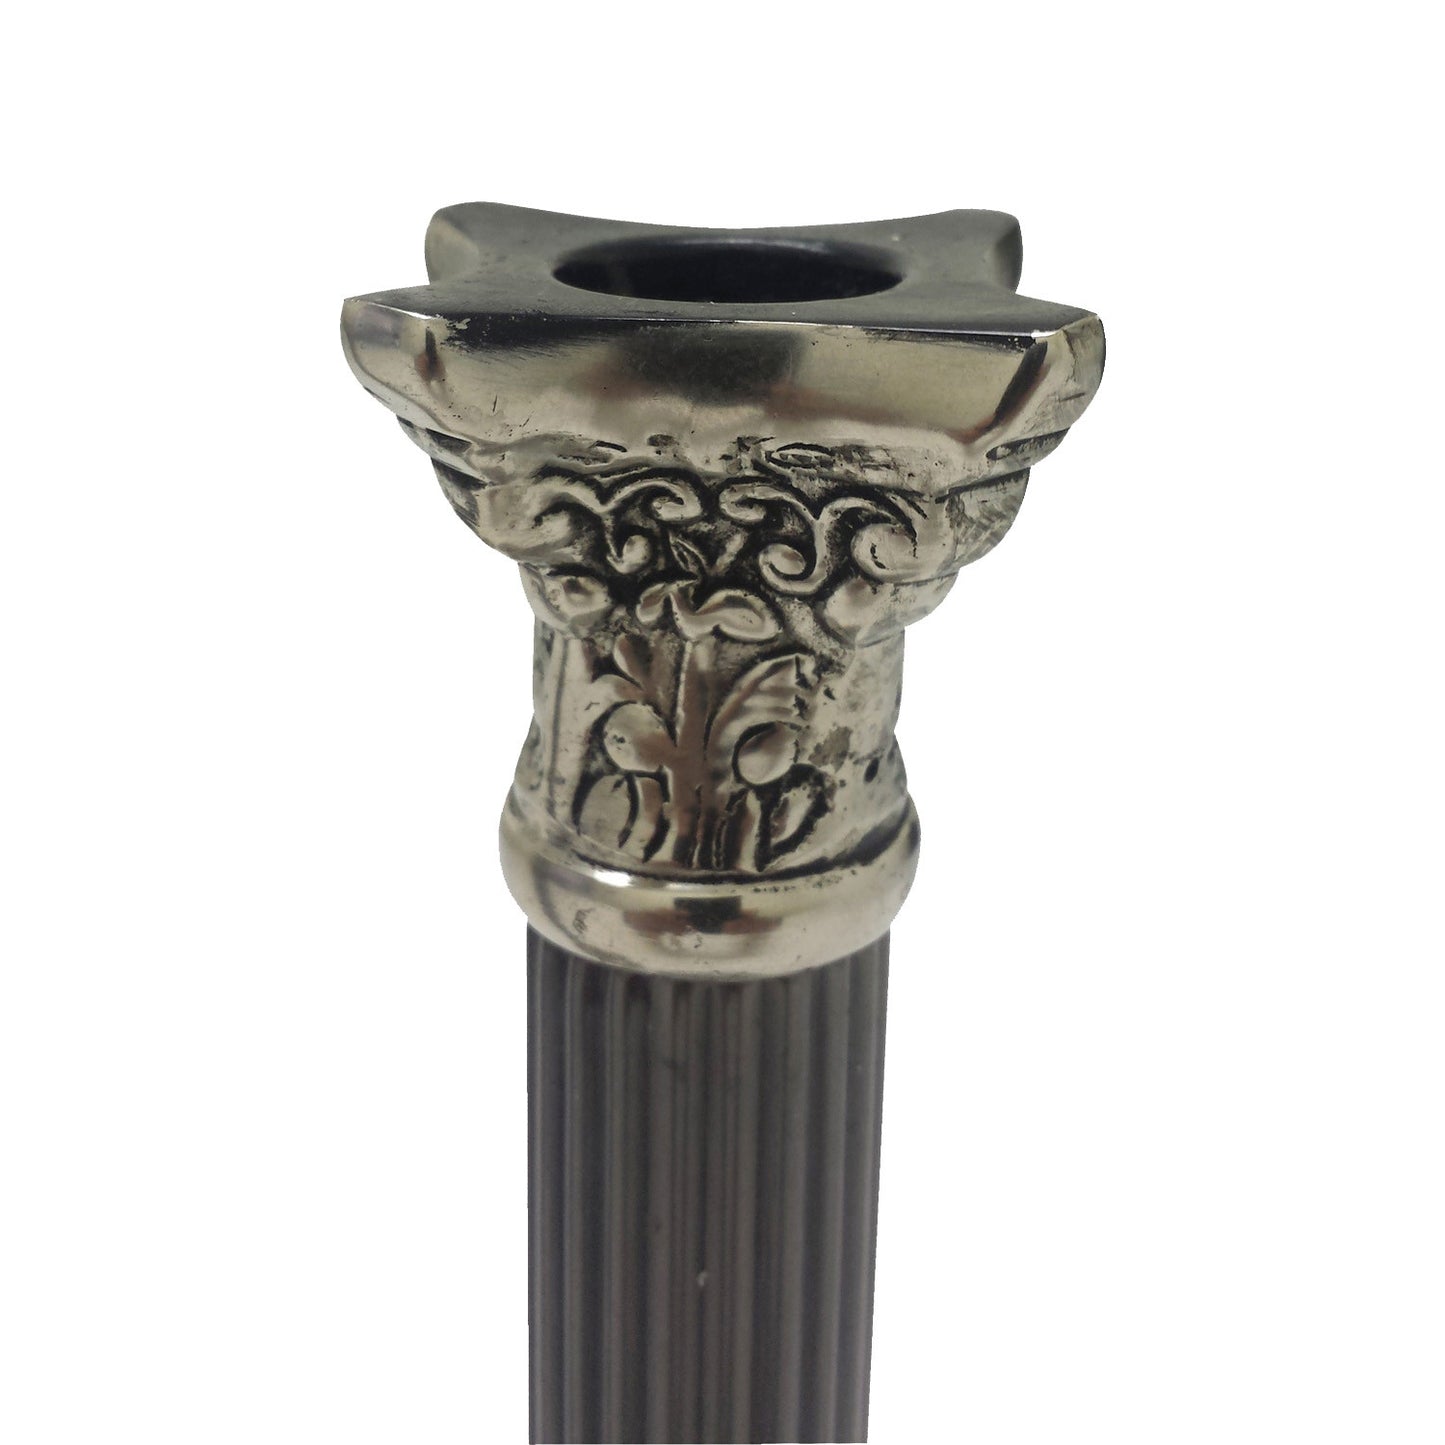 GiftBay 1007 Candlestick Holder, Antique Black and Silver Finish, 9"h